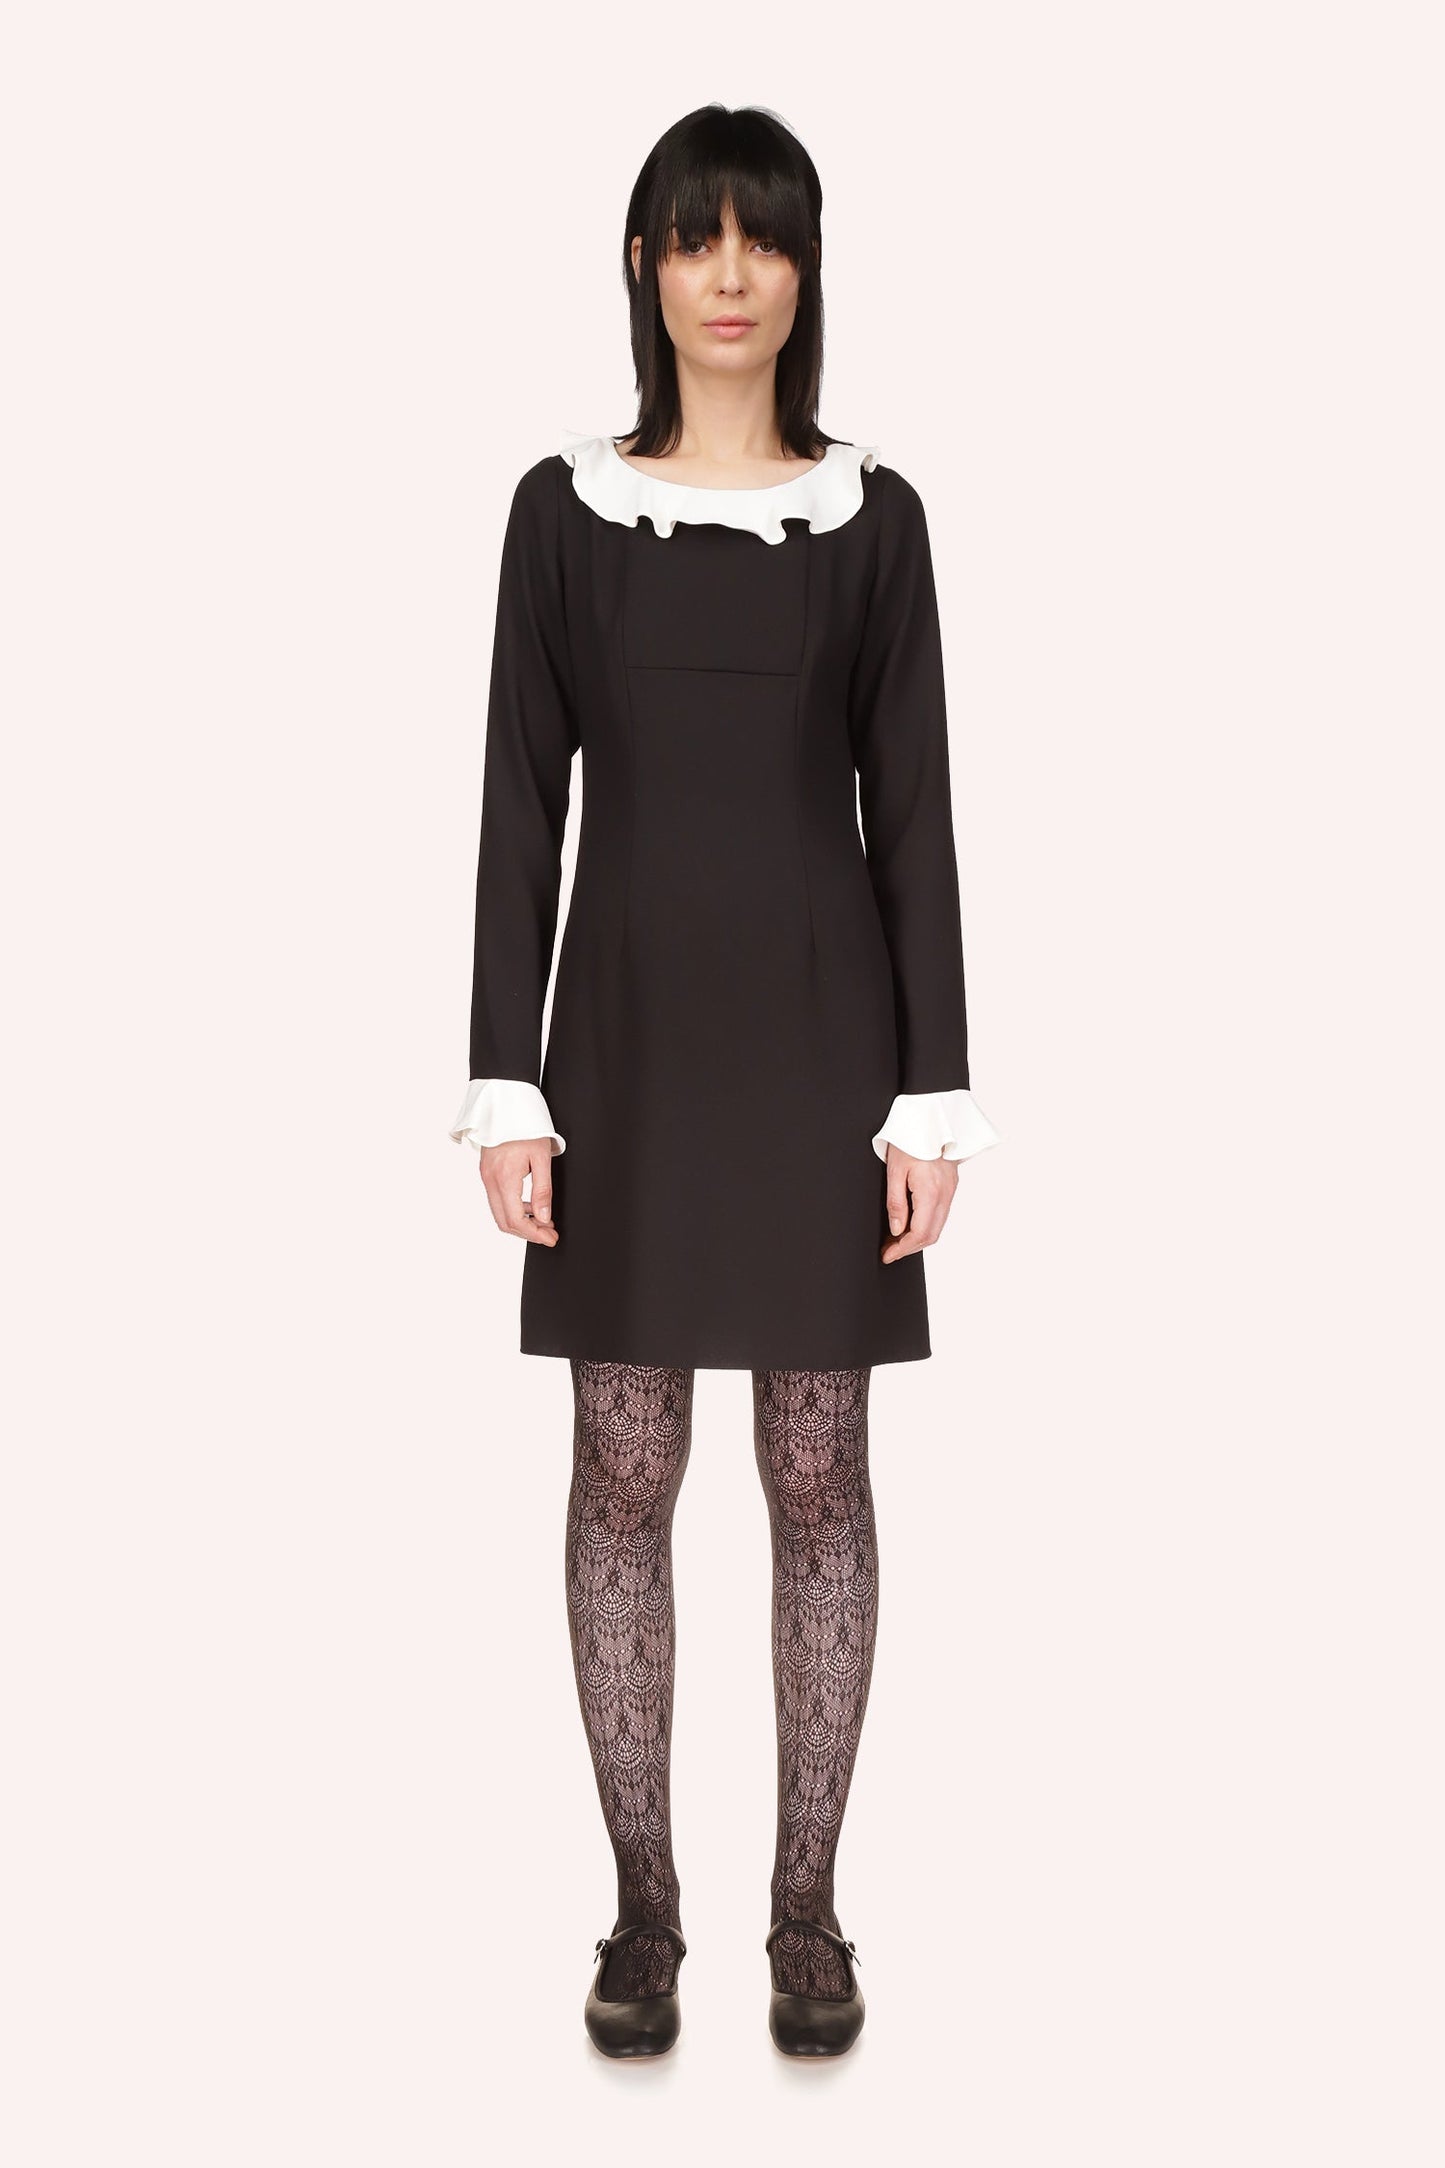 Combo Crepe Dress is above-the-knee dress, vanilla crepe on the long sleeves and collar borders